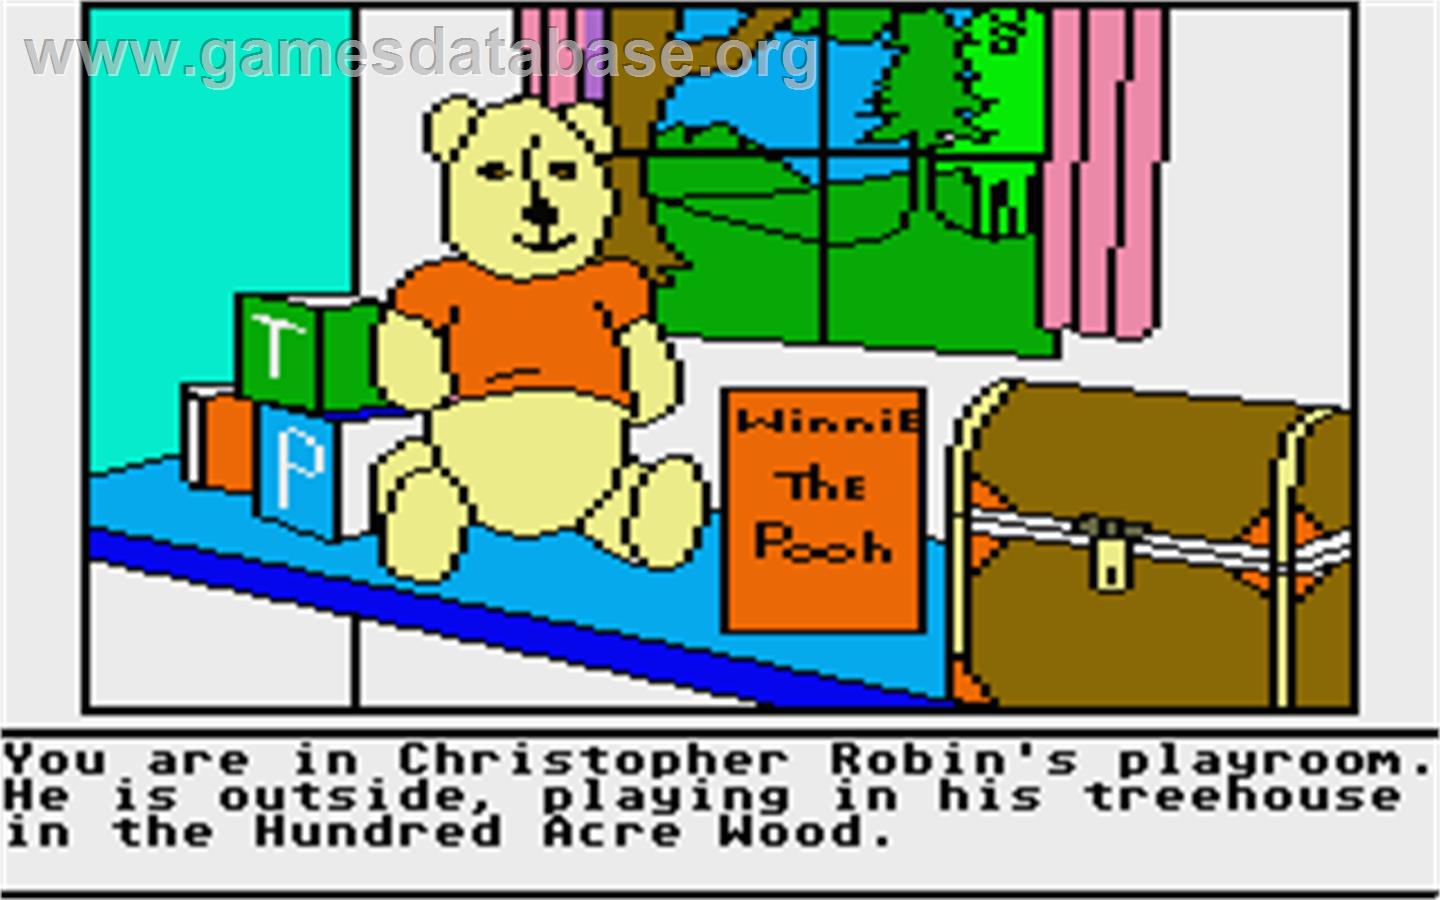 Winnie the Pooh in the Hundred Acre Wood - Atari ST - Artwork - In Game